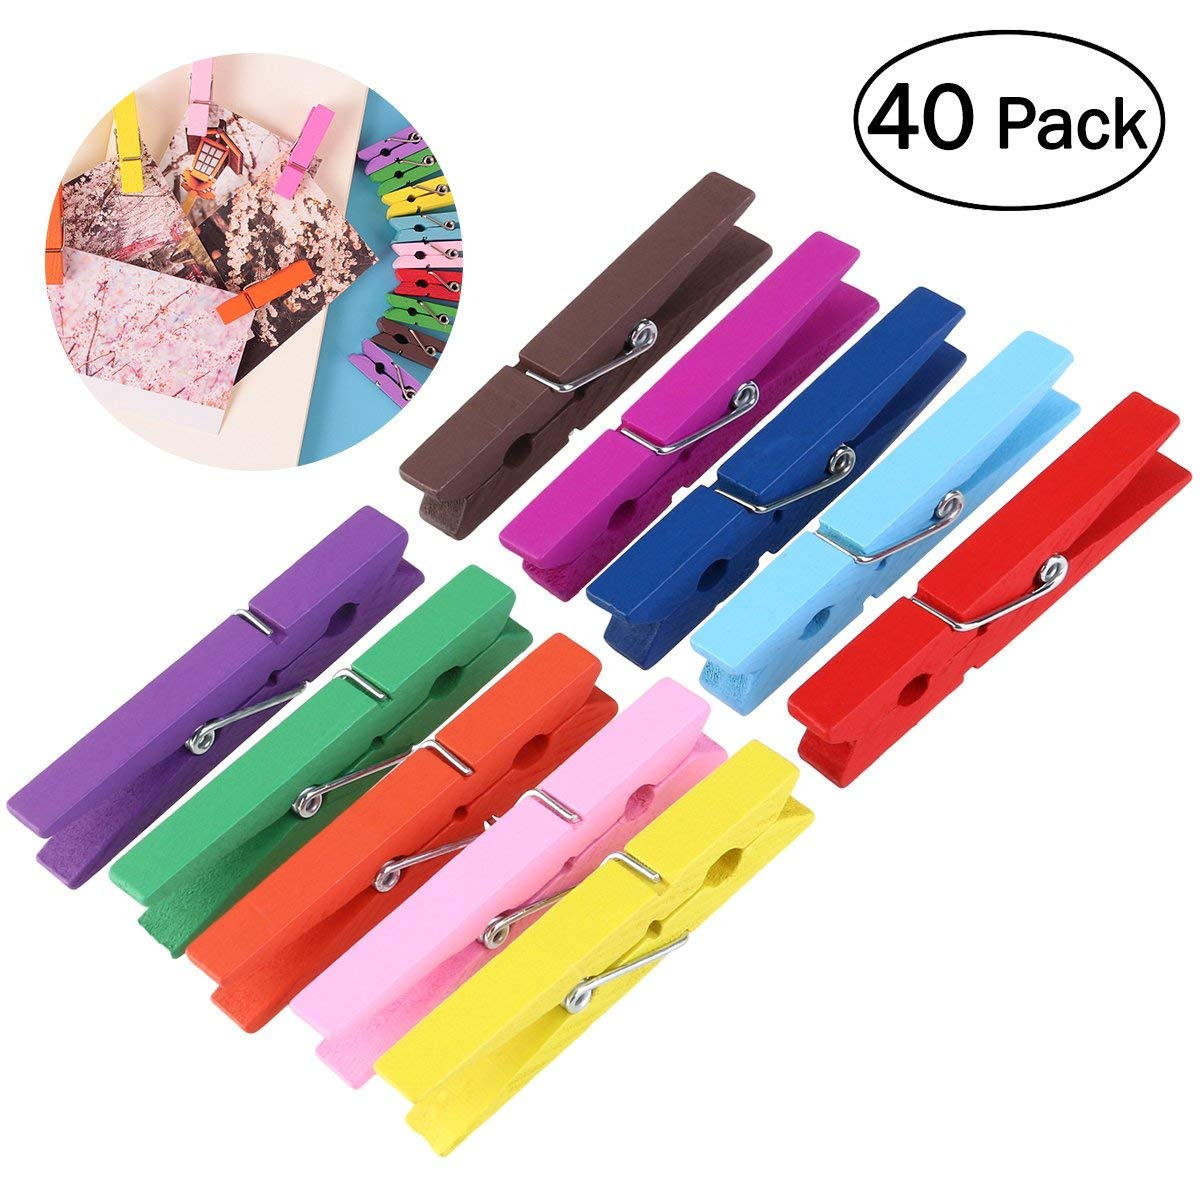 colorful clothes pins